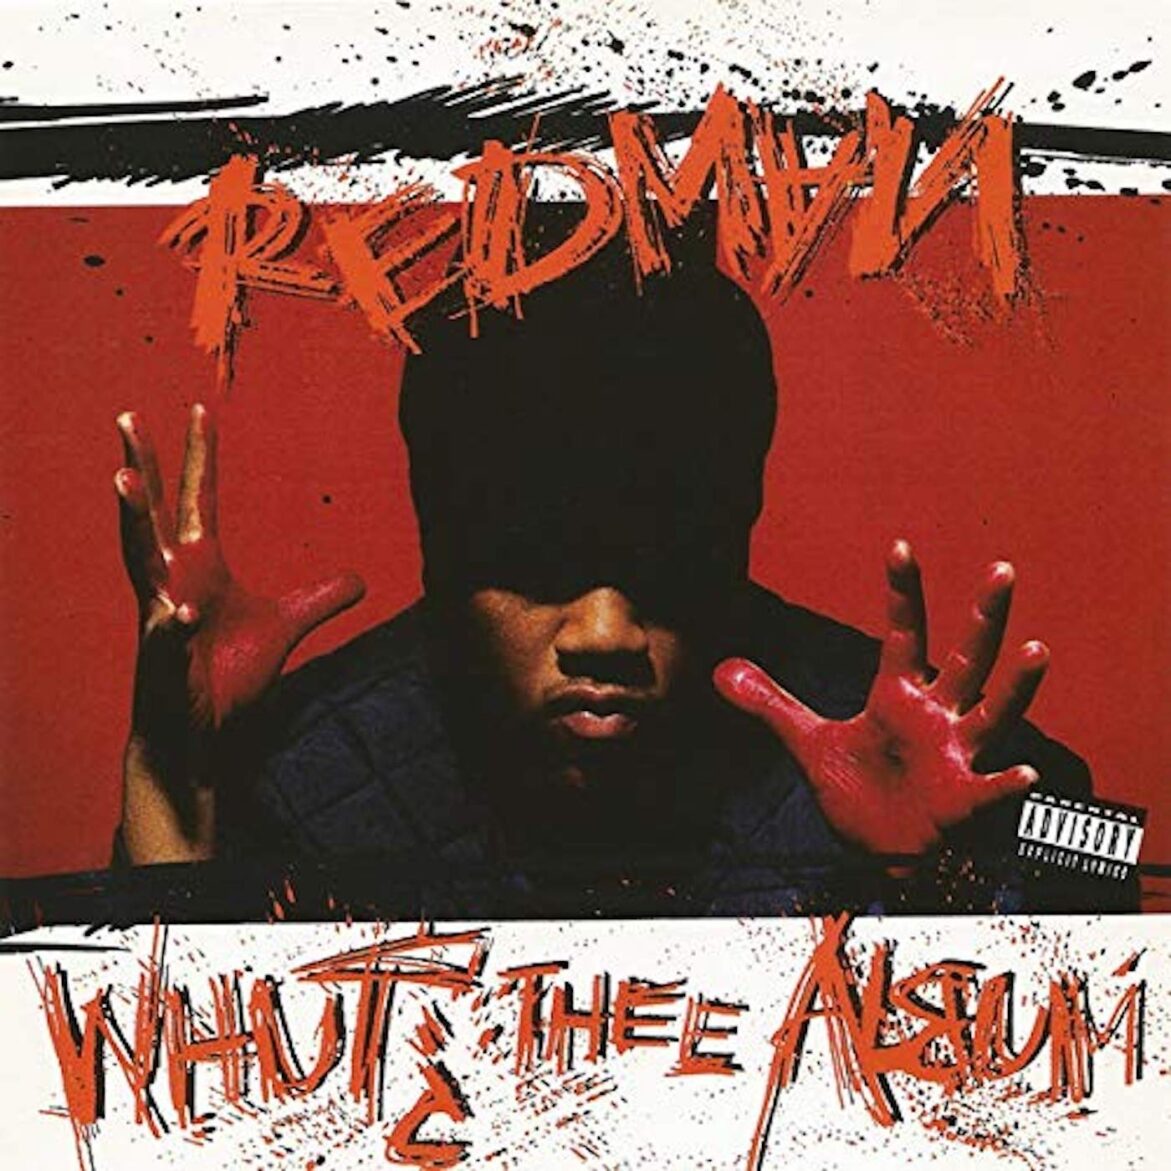 Black Podcasting - Redman: Whut? Thee Album (1992). "And Introducing From Tha Bricks..."